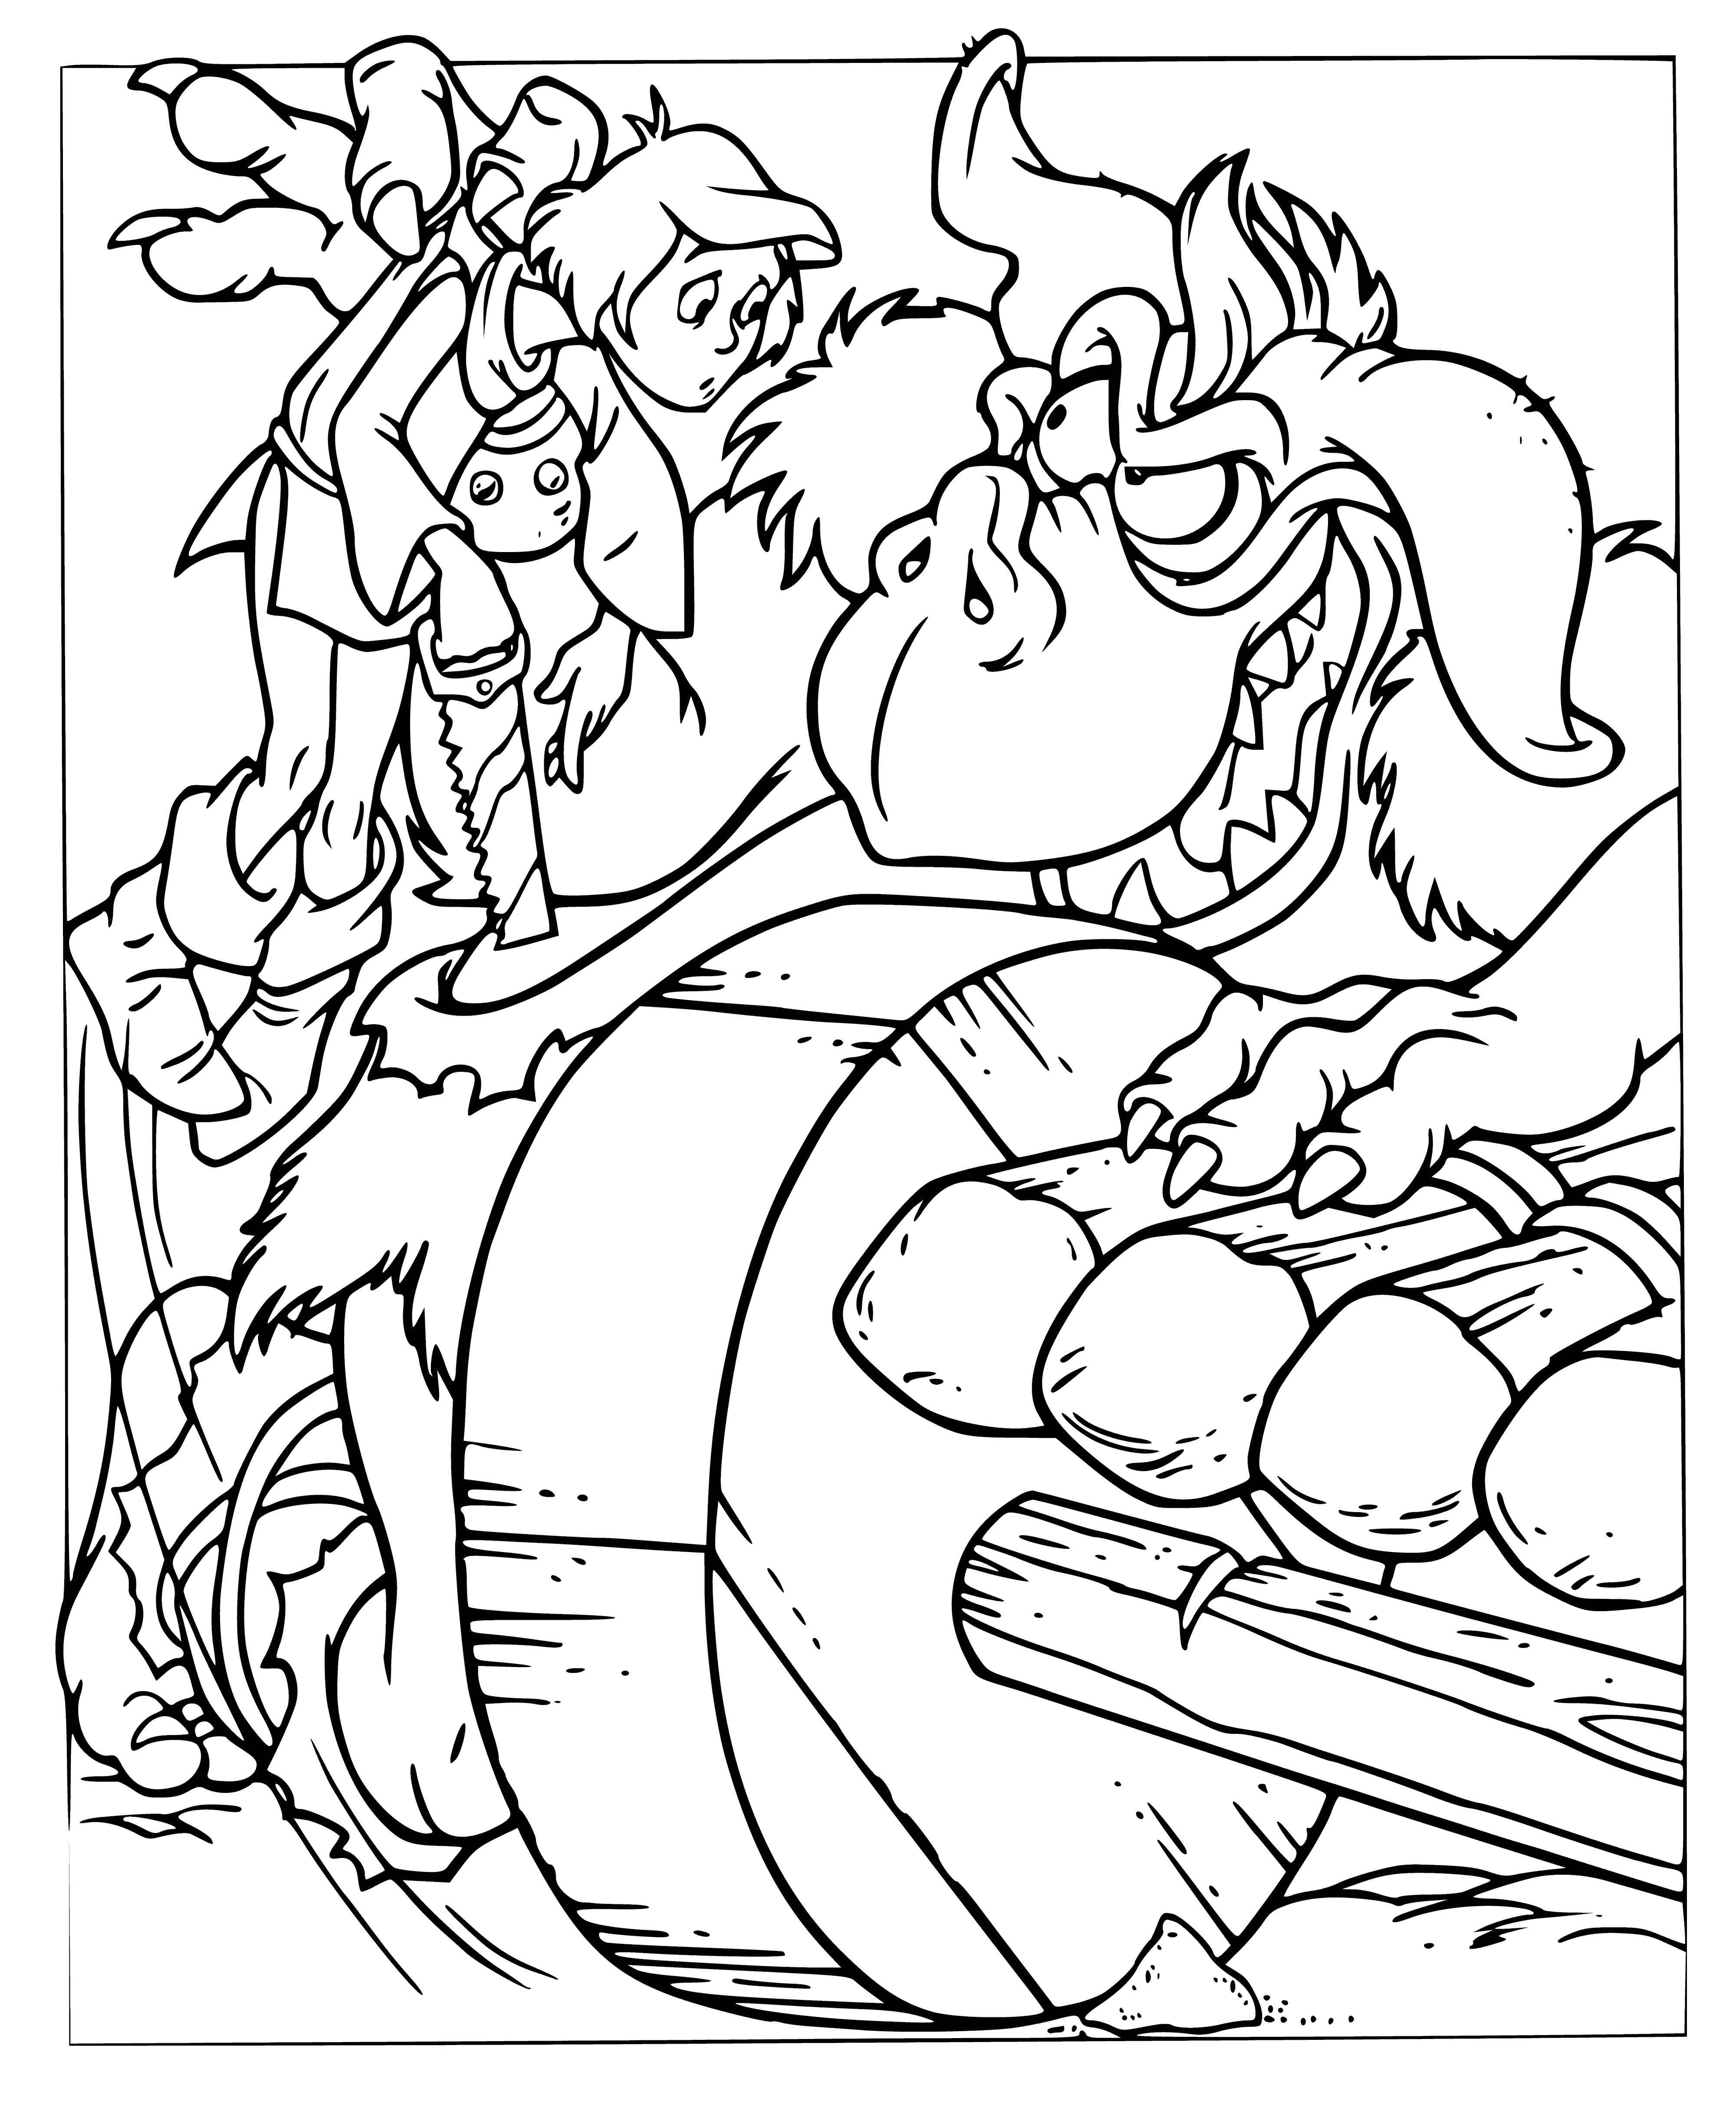 coloring page: A green goblin from the Gummi Bears with yellow eyes, pointy ears, and sharp teeth is wearing a red shirt and blue pants, with a belt and dagger.